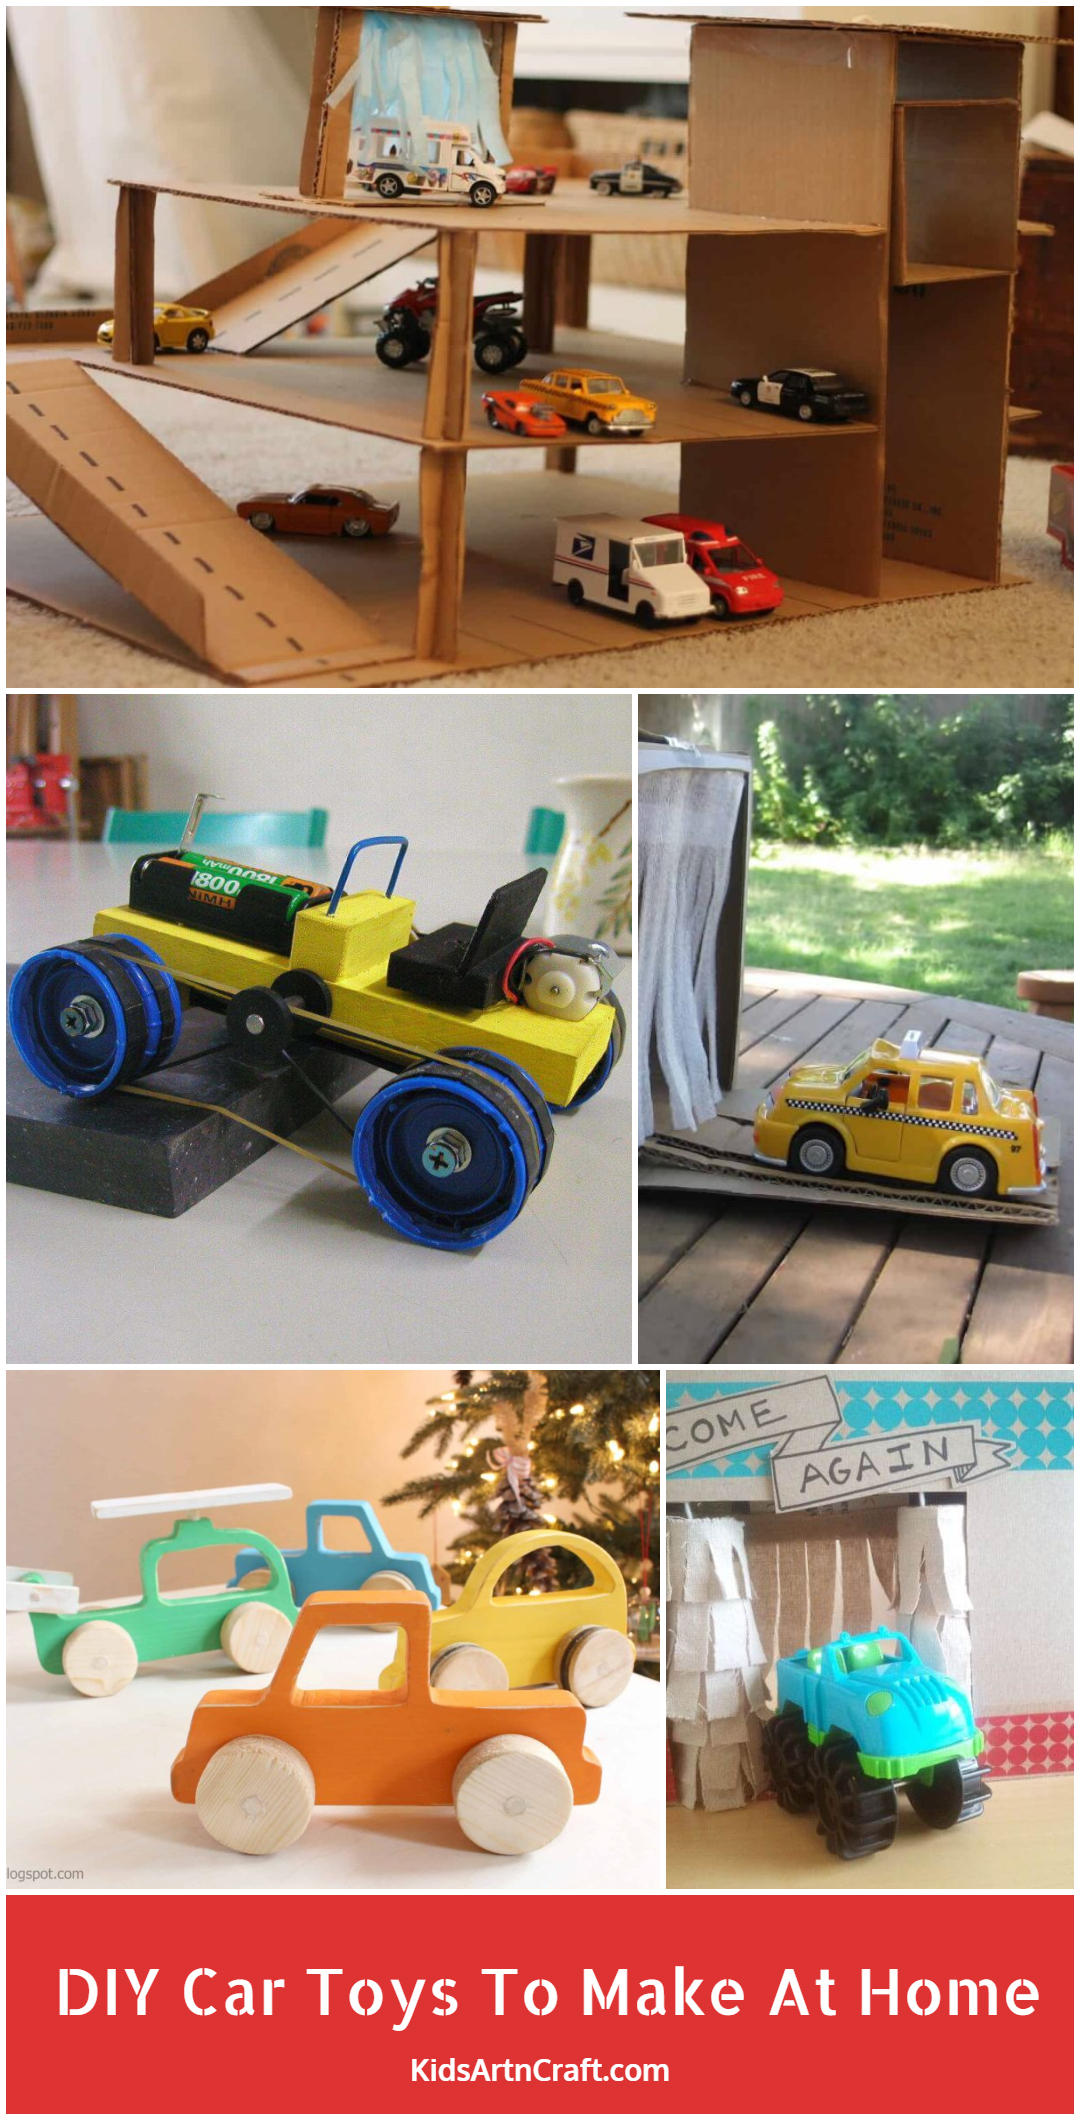 DIY Awesome Car Toys to Make at Home For Toddlers